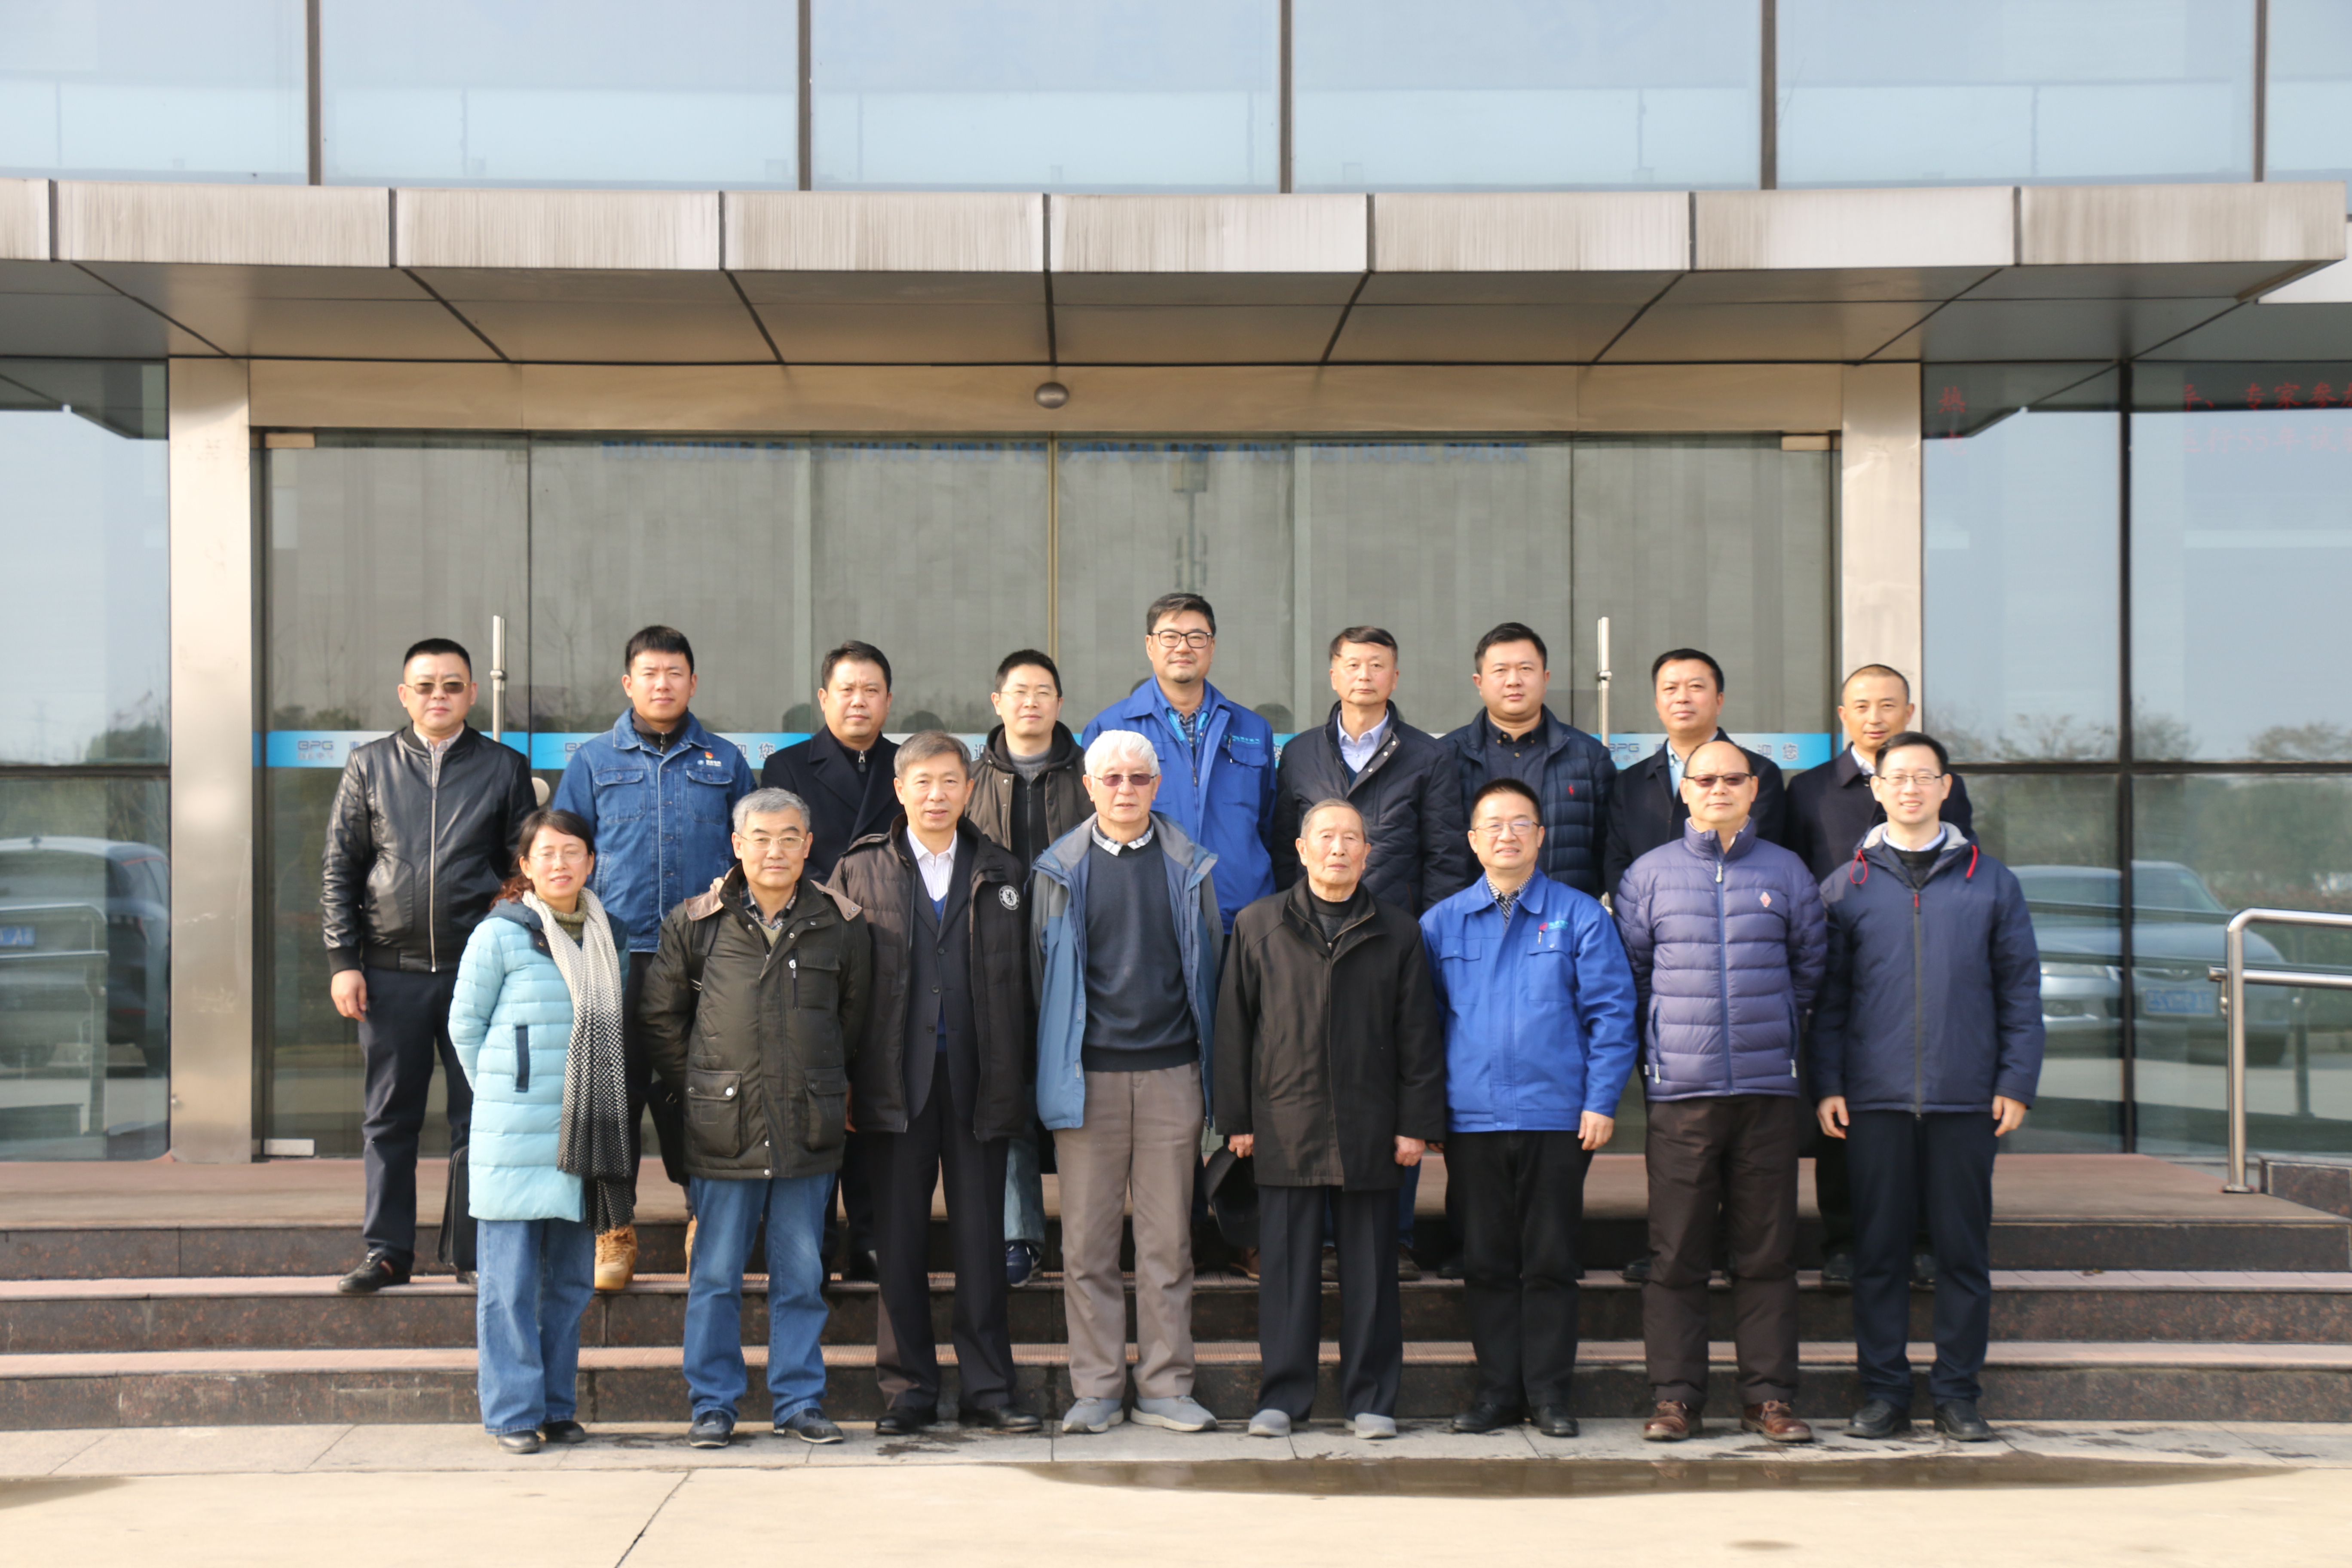 Test and verification meeting held regarding the 55 years operation of glass insulator in Nanjing Electric